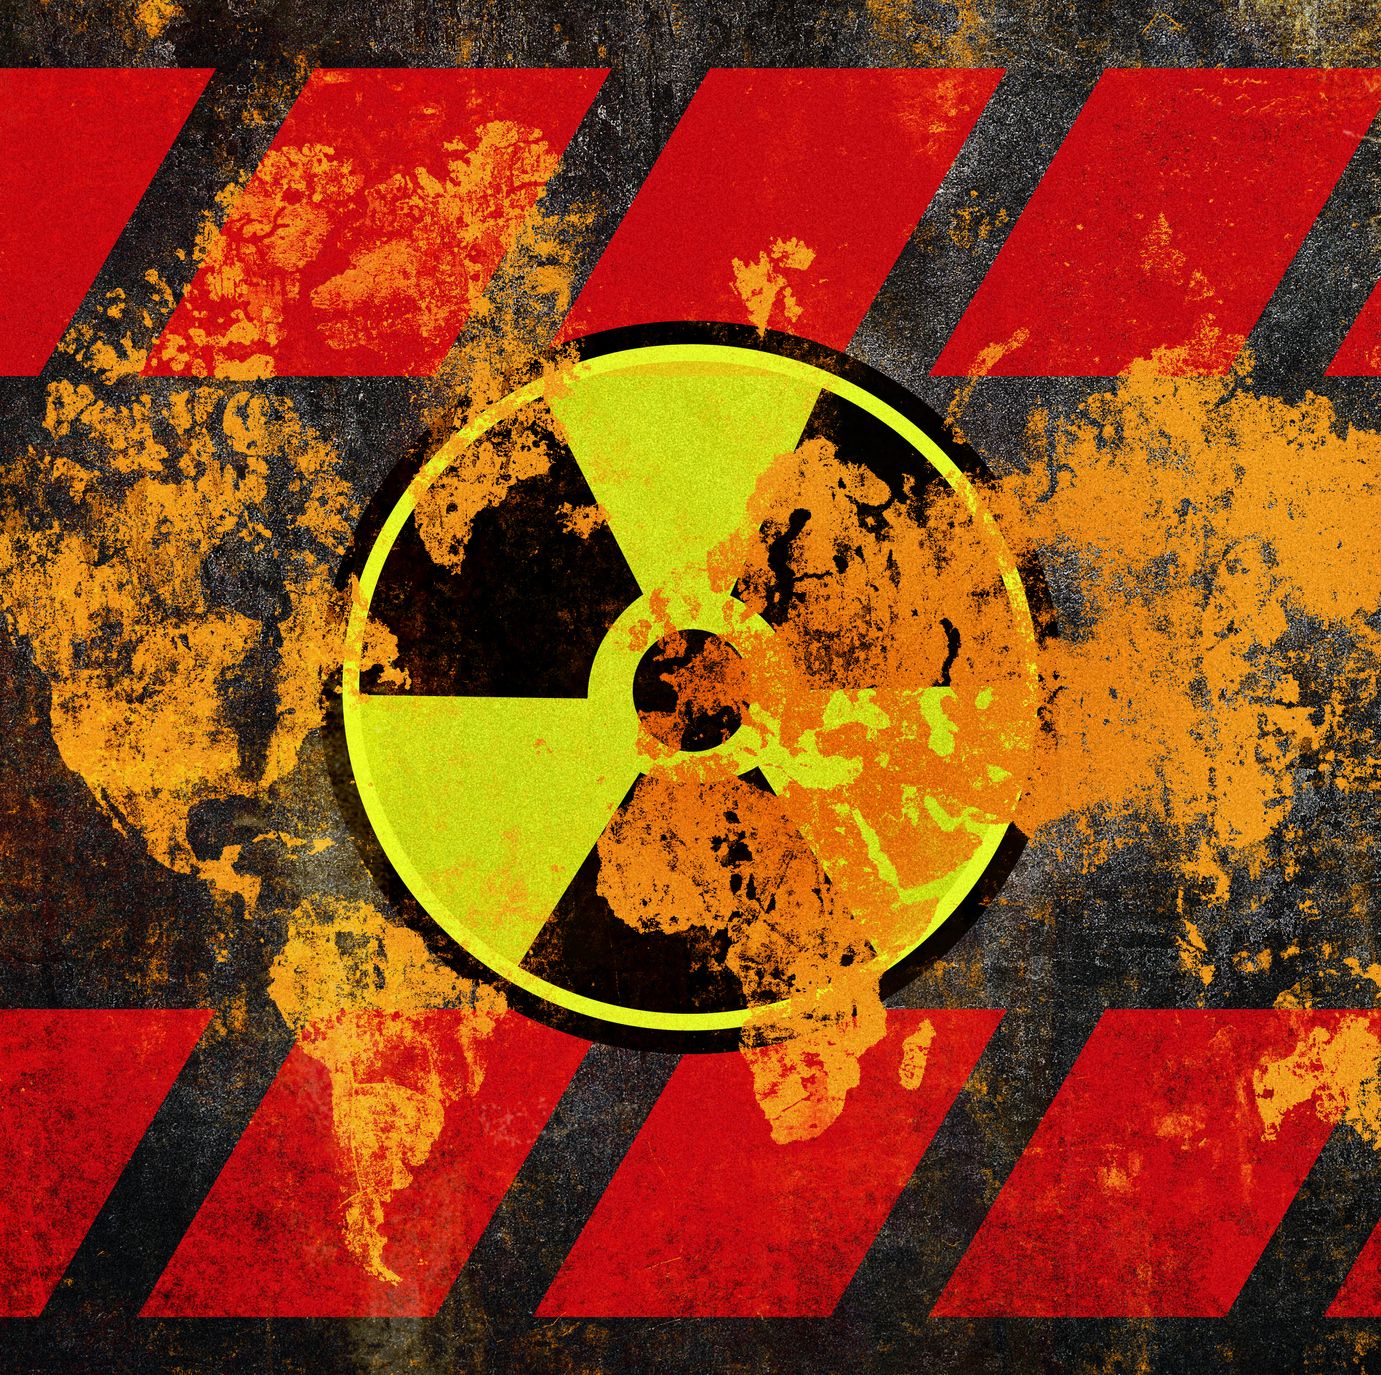 Buried Nuclear Waste May Soon Rise From the Grave